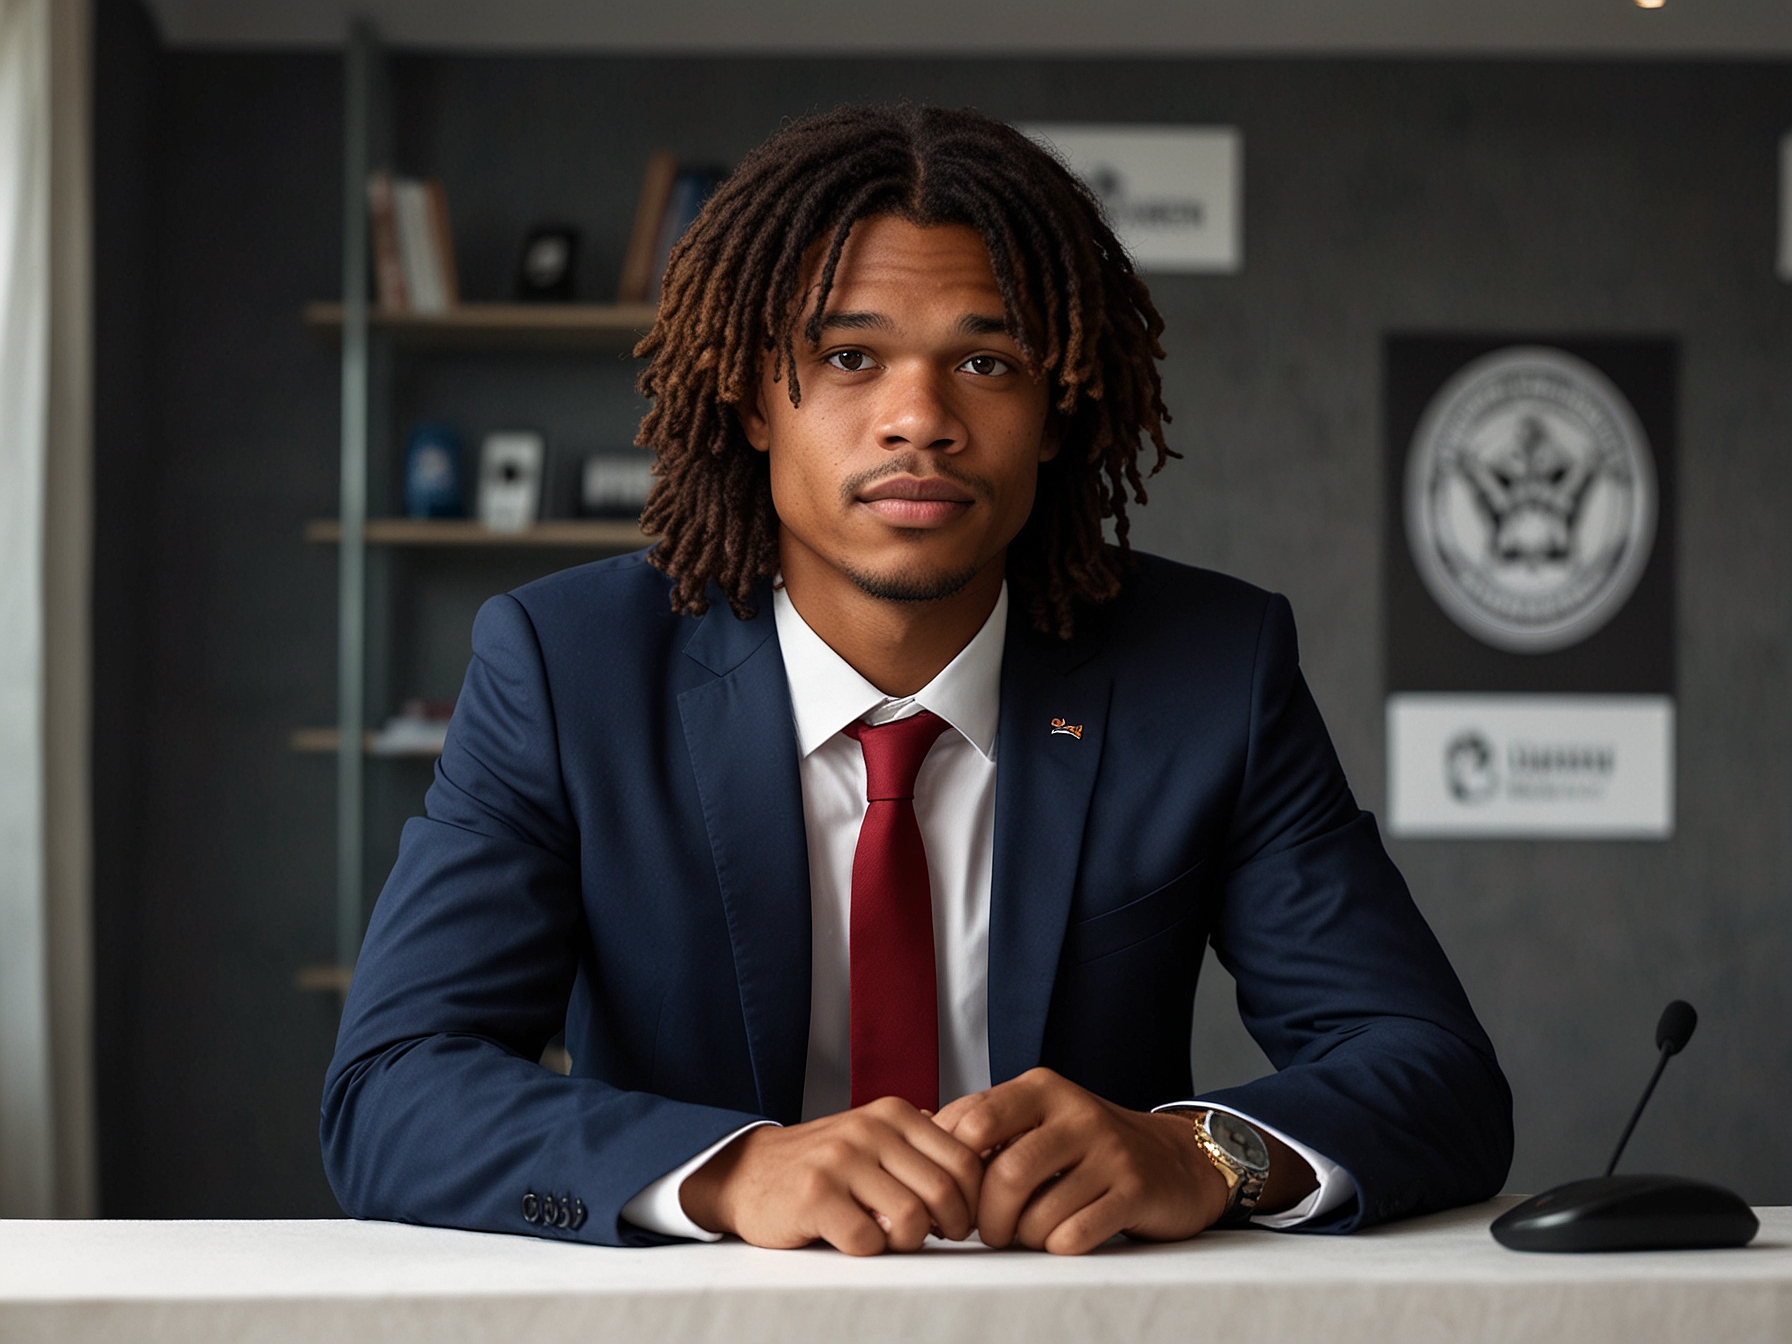 Nathan Ake speaking at a press conference, emphasizing the need for understanding intent and context in fans dressing up as Ruud Gullit, amidst the 'blackface' controversy.